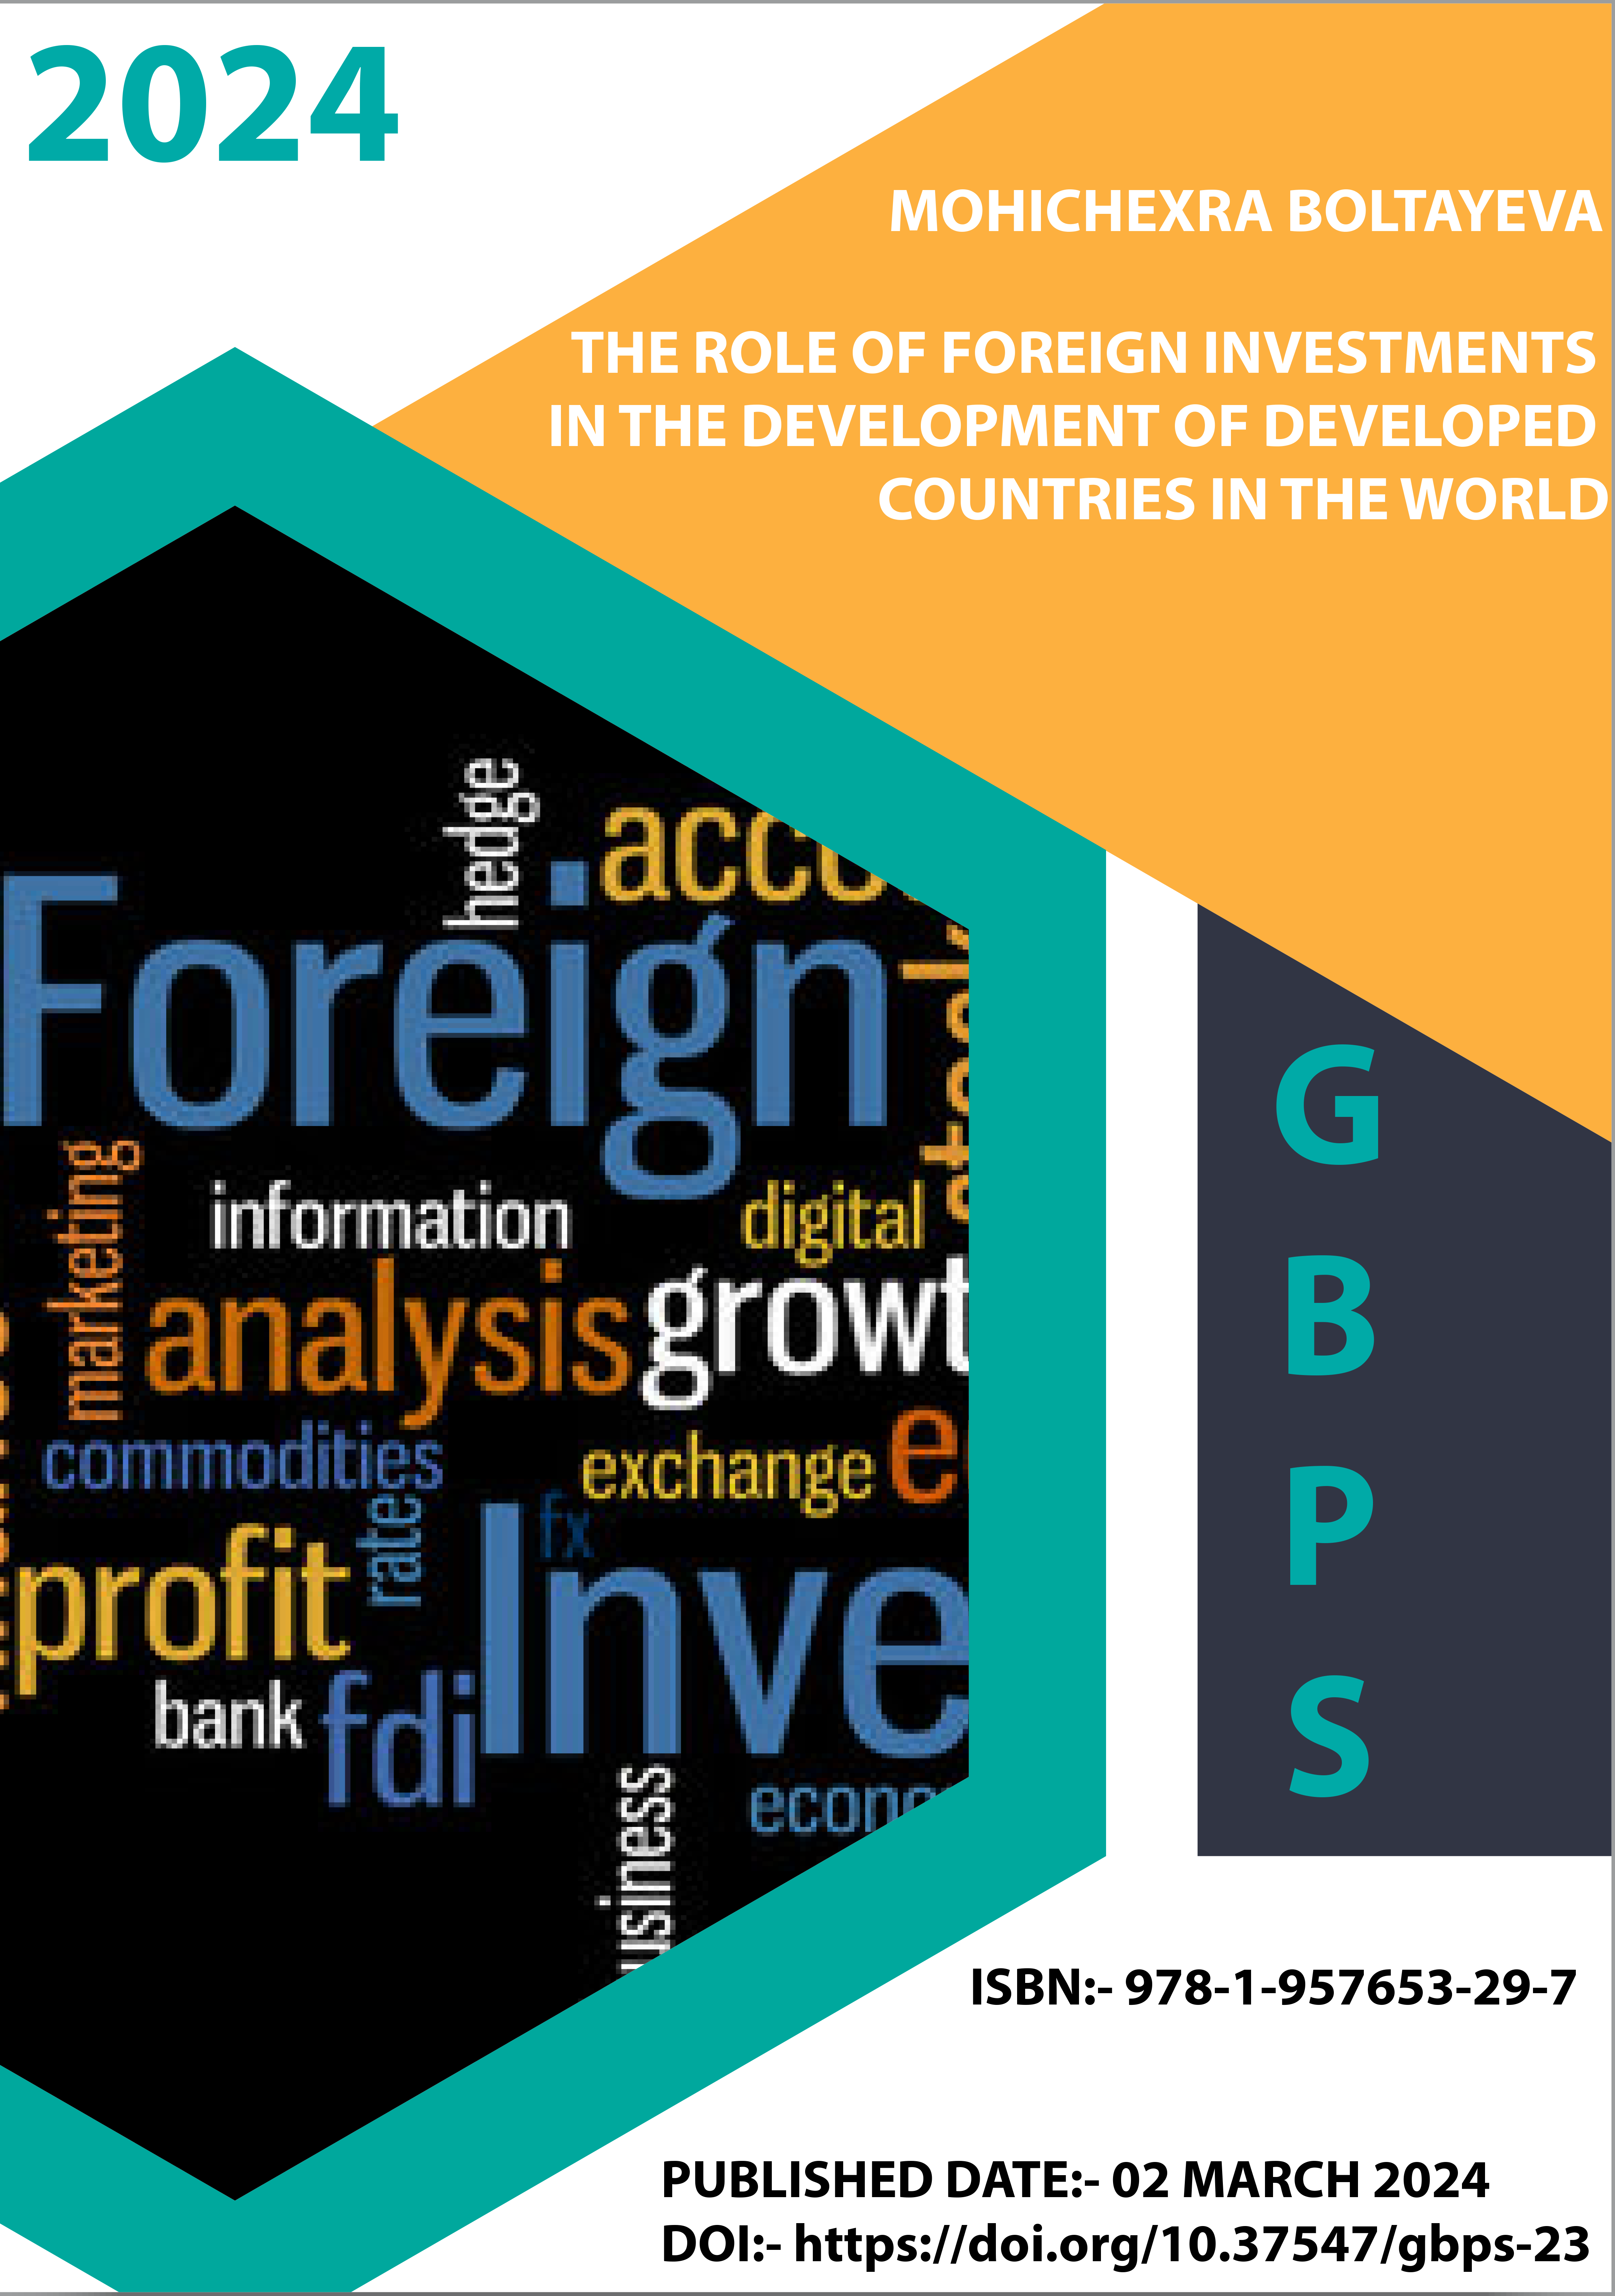 					View THE ROLE OF FOREIGN INVESTMENTS IN THE DEVELOPMENT OF DEVELOPED COUNTRIES IN THE WORLD
				